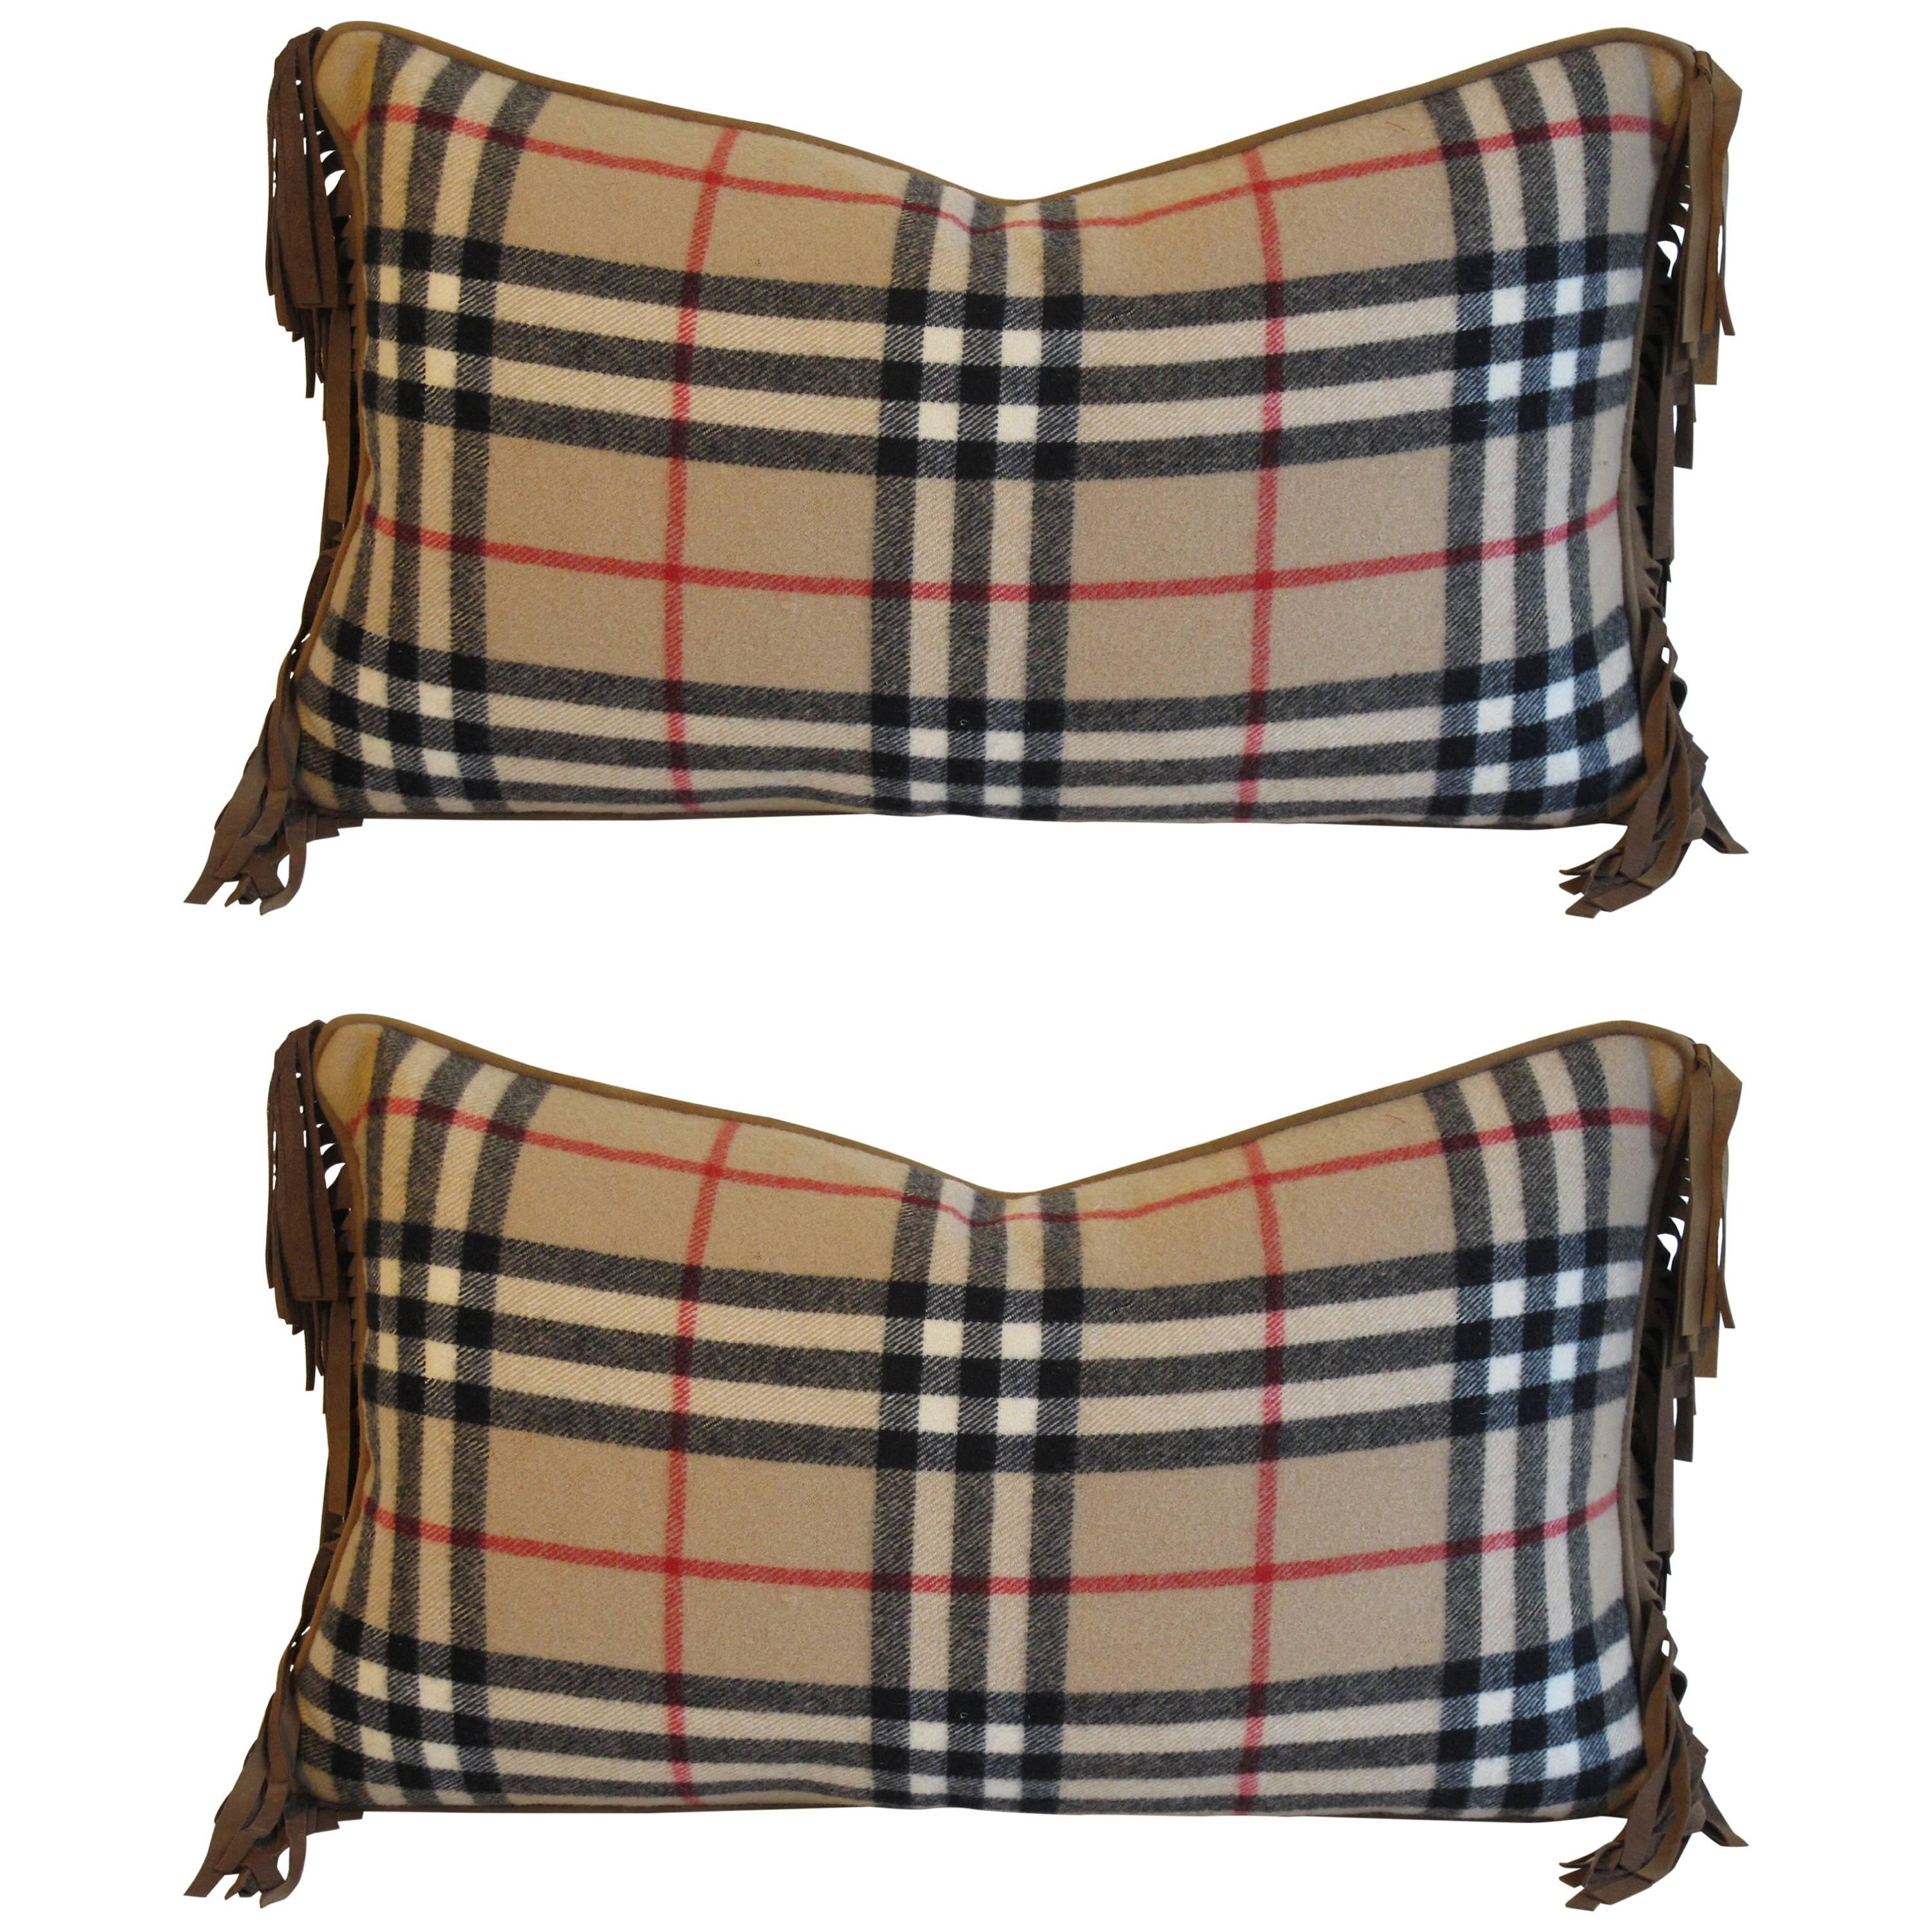 Pair of Vintage Burberry Wool Pillows by Mary Jane McCarty